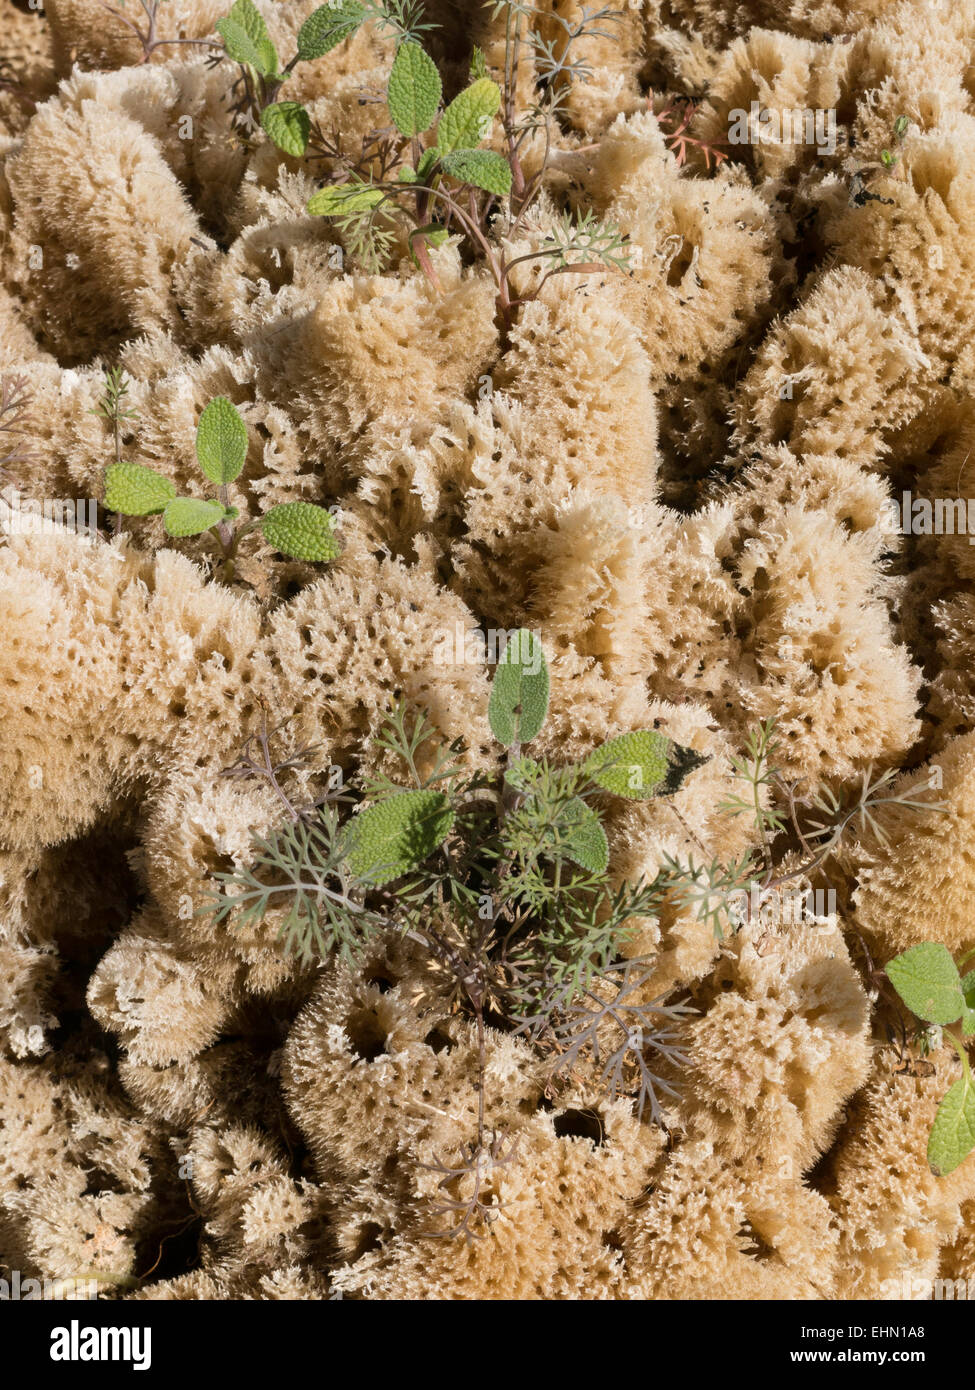 Natural Sponge with Plant Growth, Tarpon Springs, FL Stock Photo